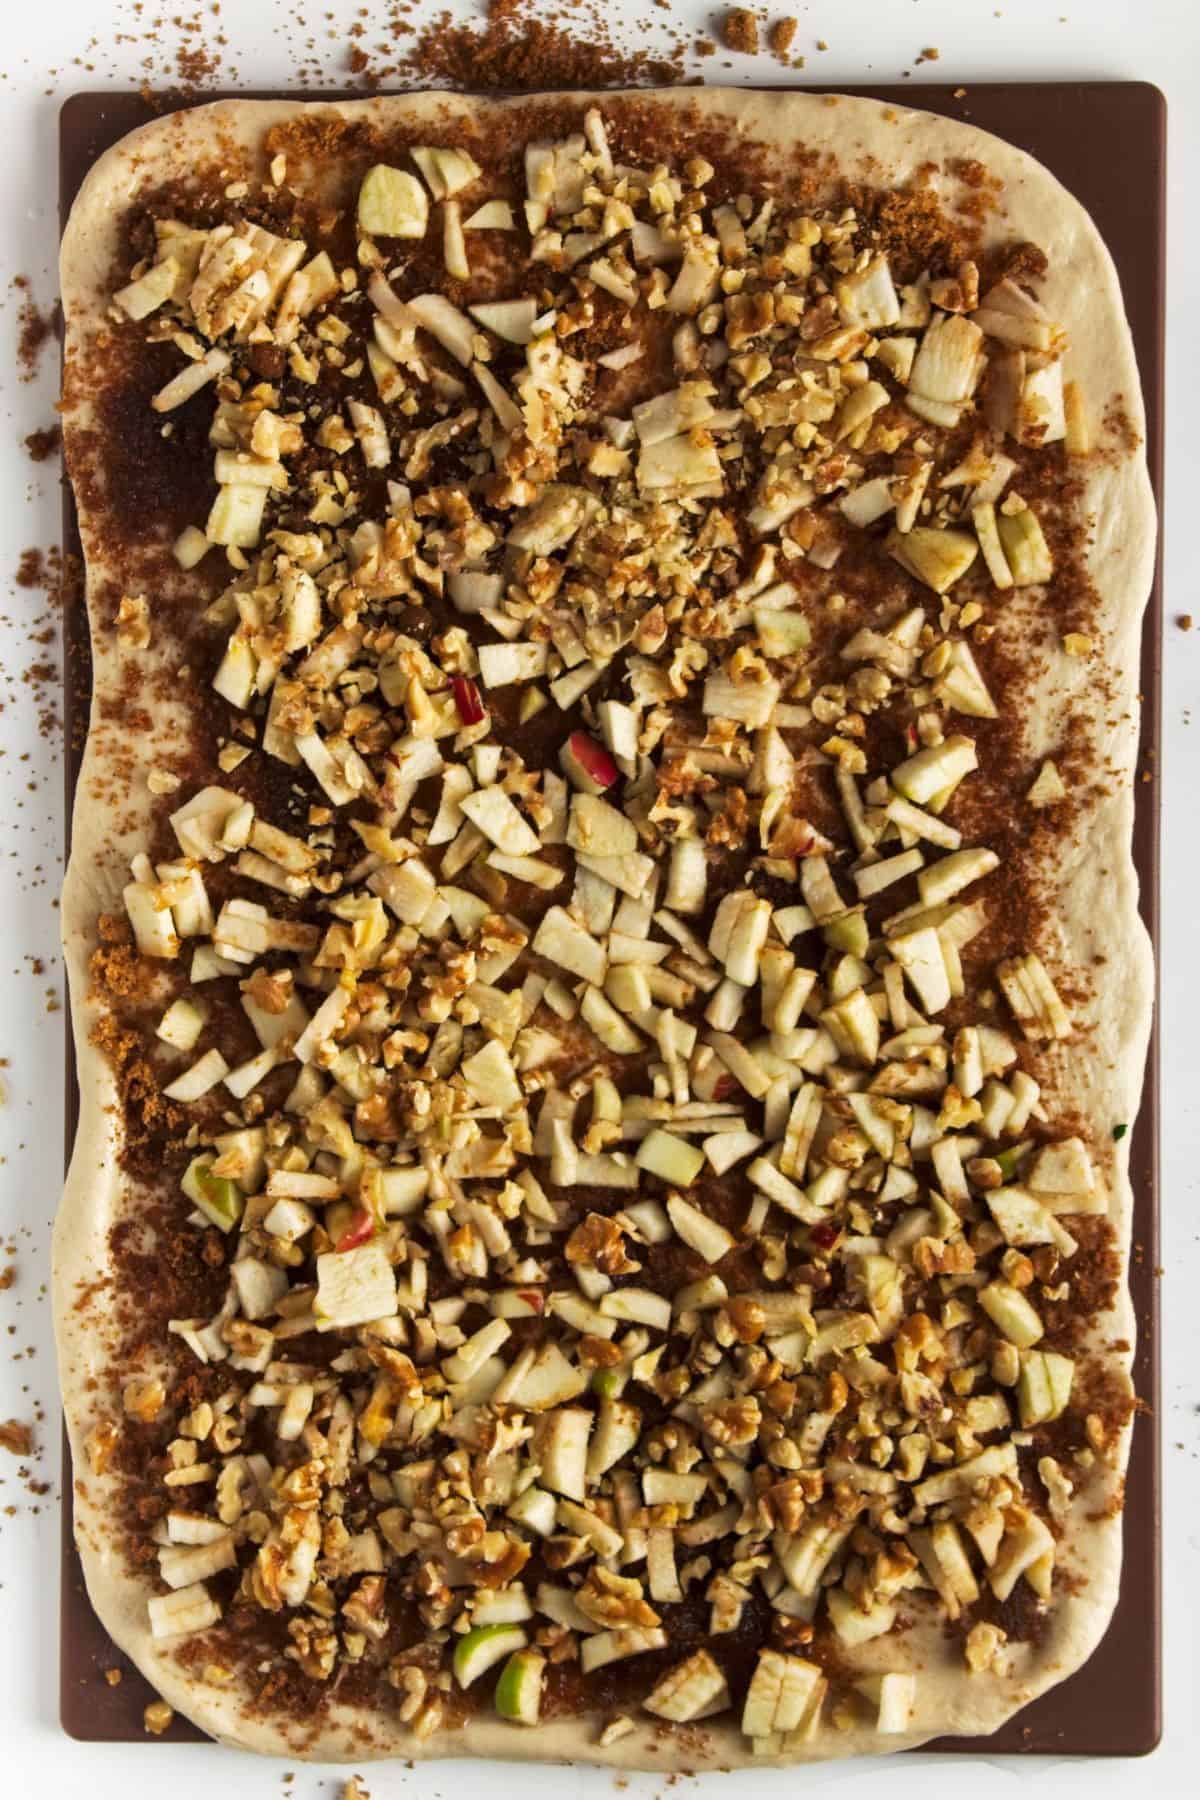 Sticky bun dough rolled out with nuts and apples spread on top